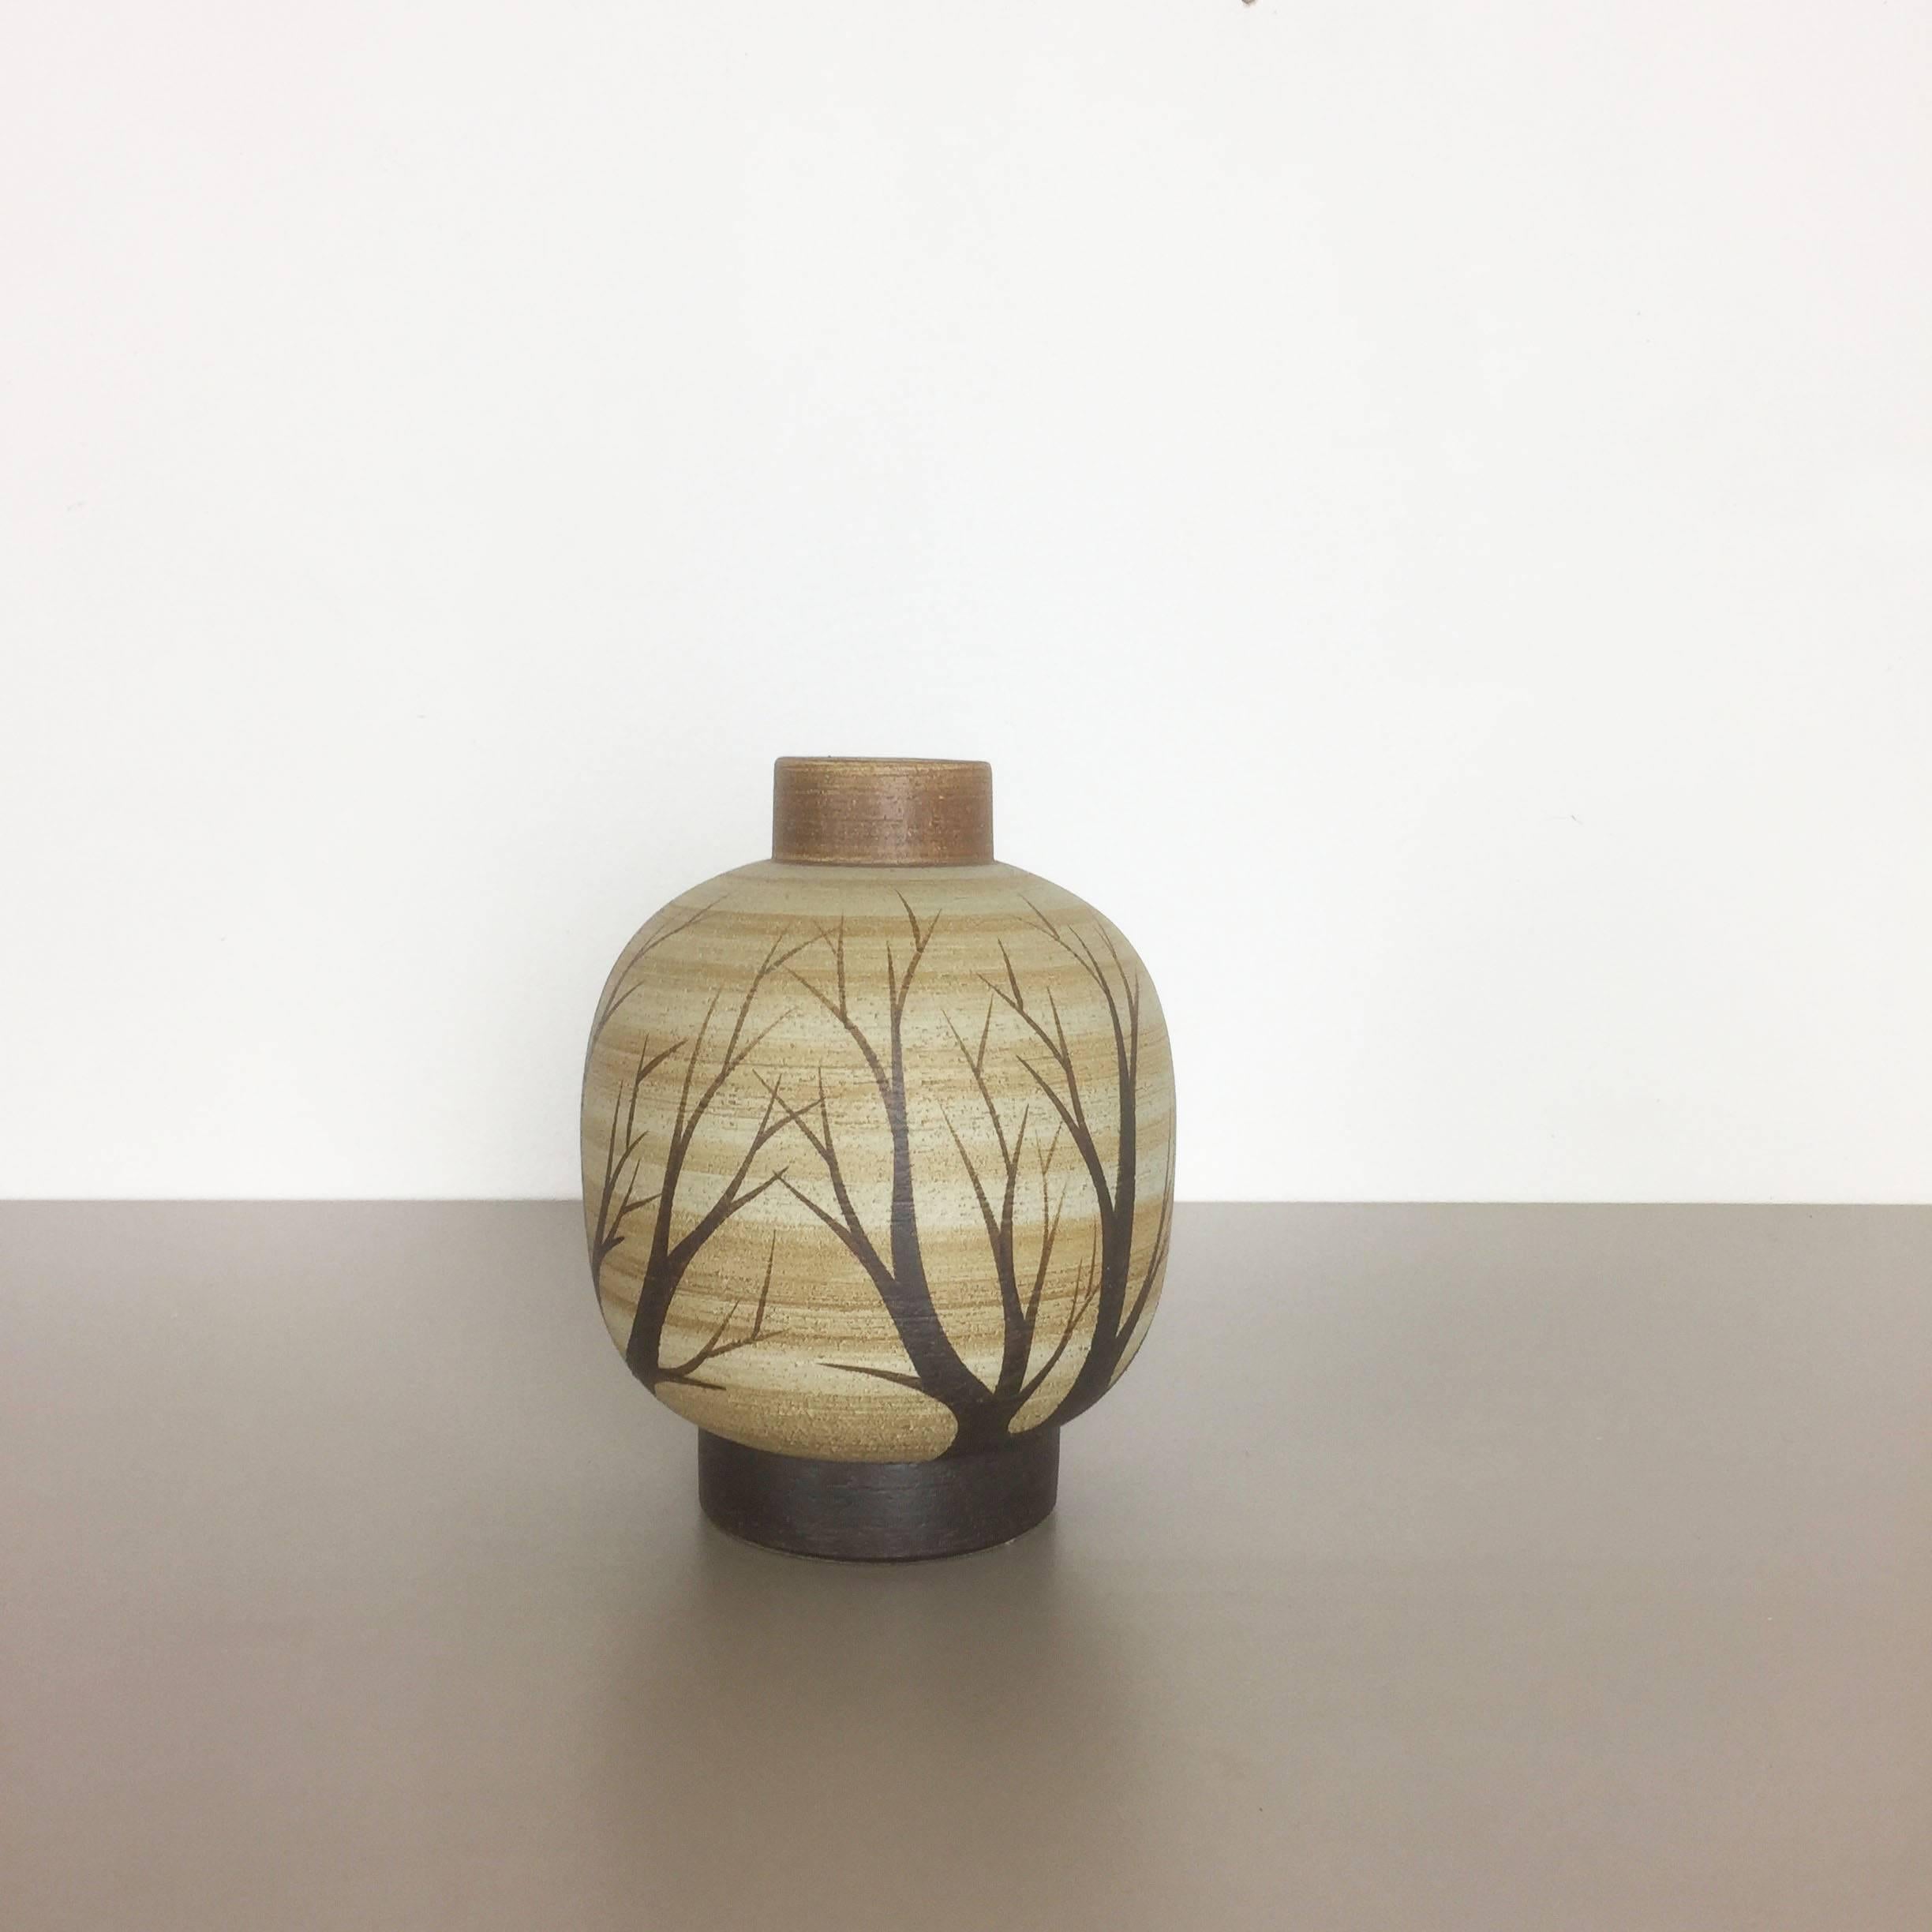 Article:

Pottery ceramic vase


Producer:

Sgrafo Modern, Germany


Design:

Peter Müller



Decade:

1960s


Description:

Original vintage 1960s pottery ceramic vase in Germany. High quality German production with a nice